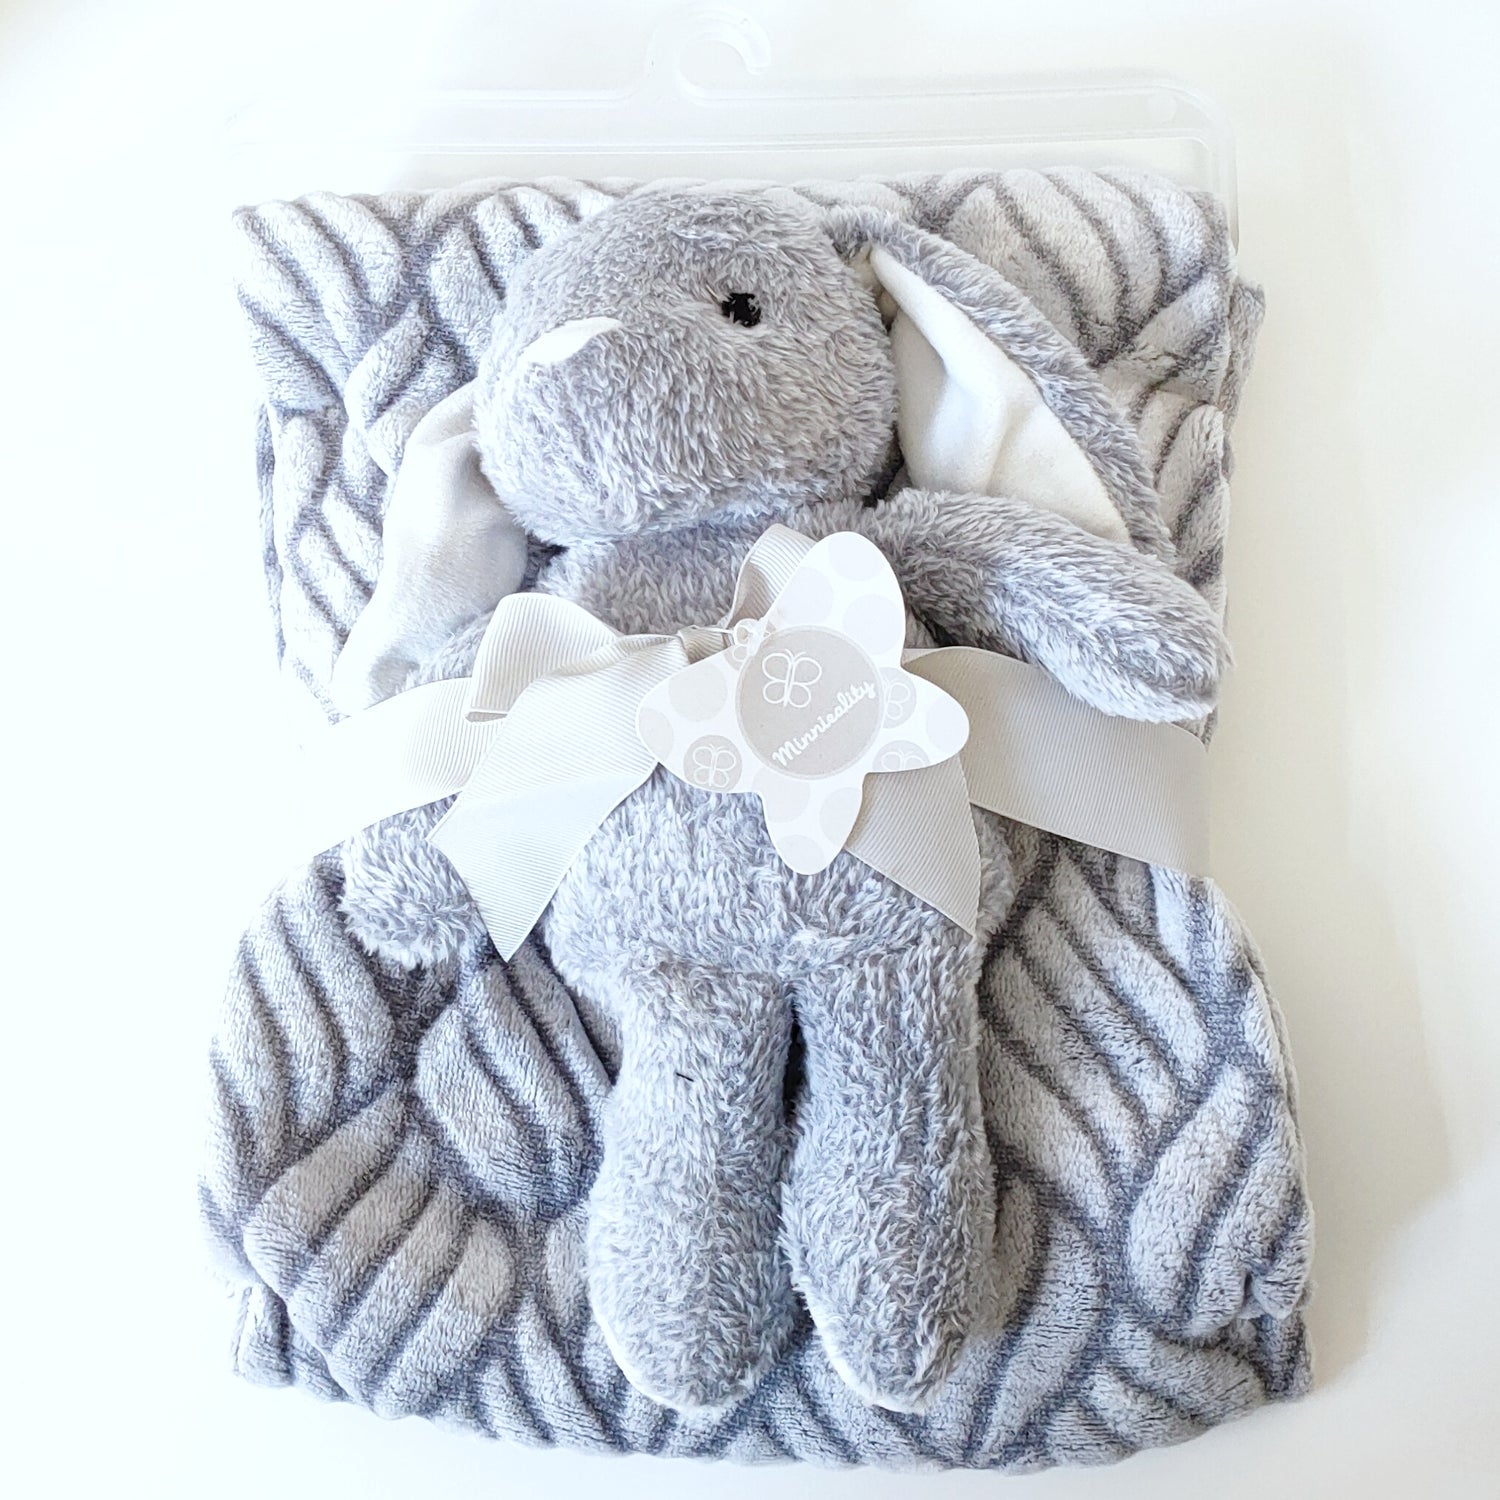 Bunnny with Blanket - Nappie Cakes